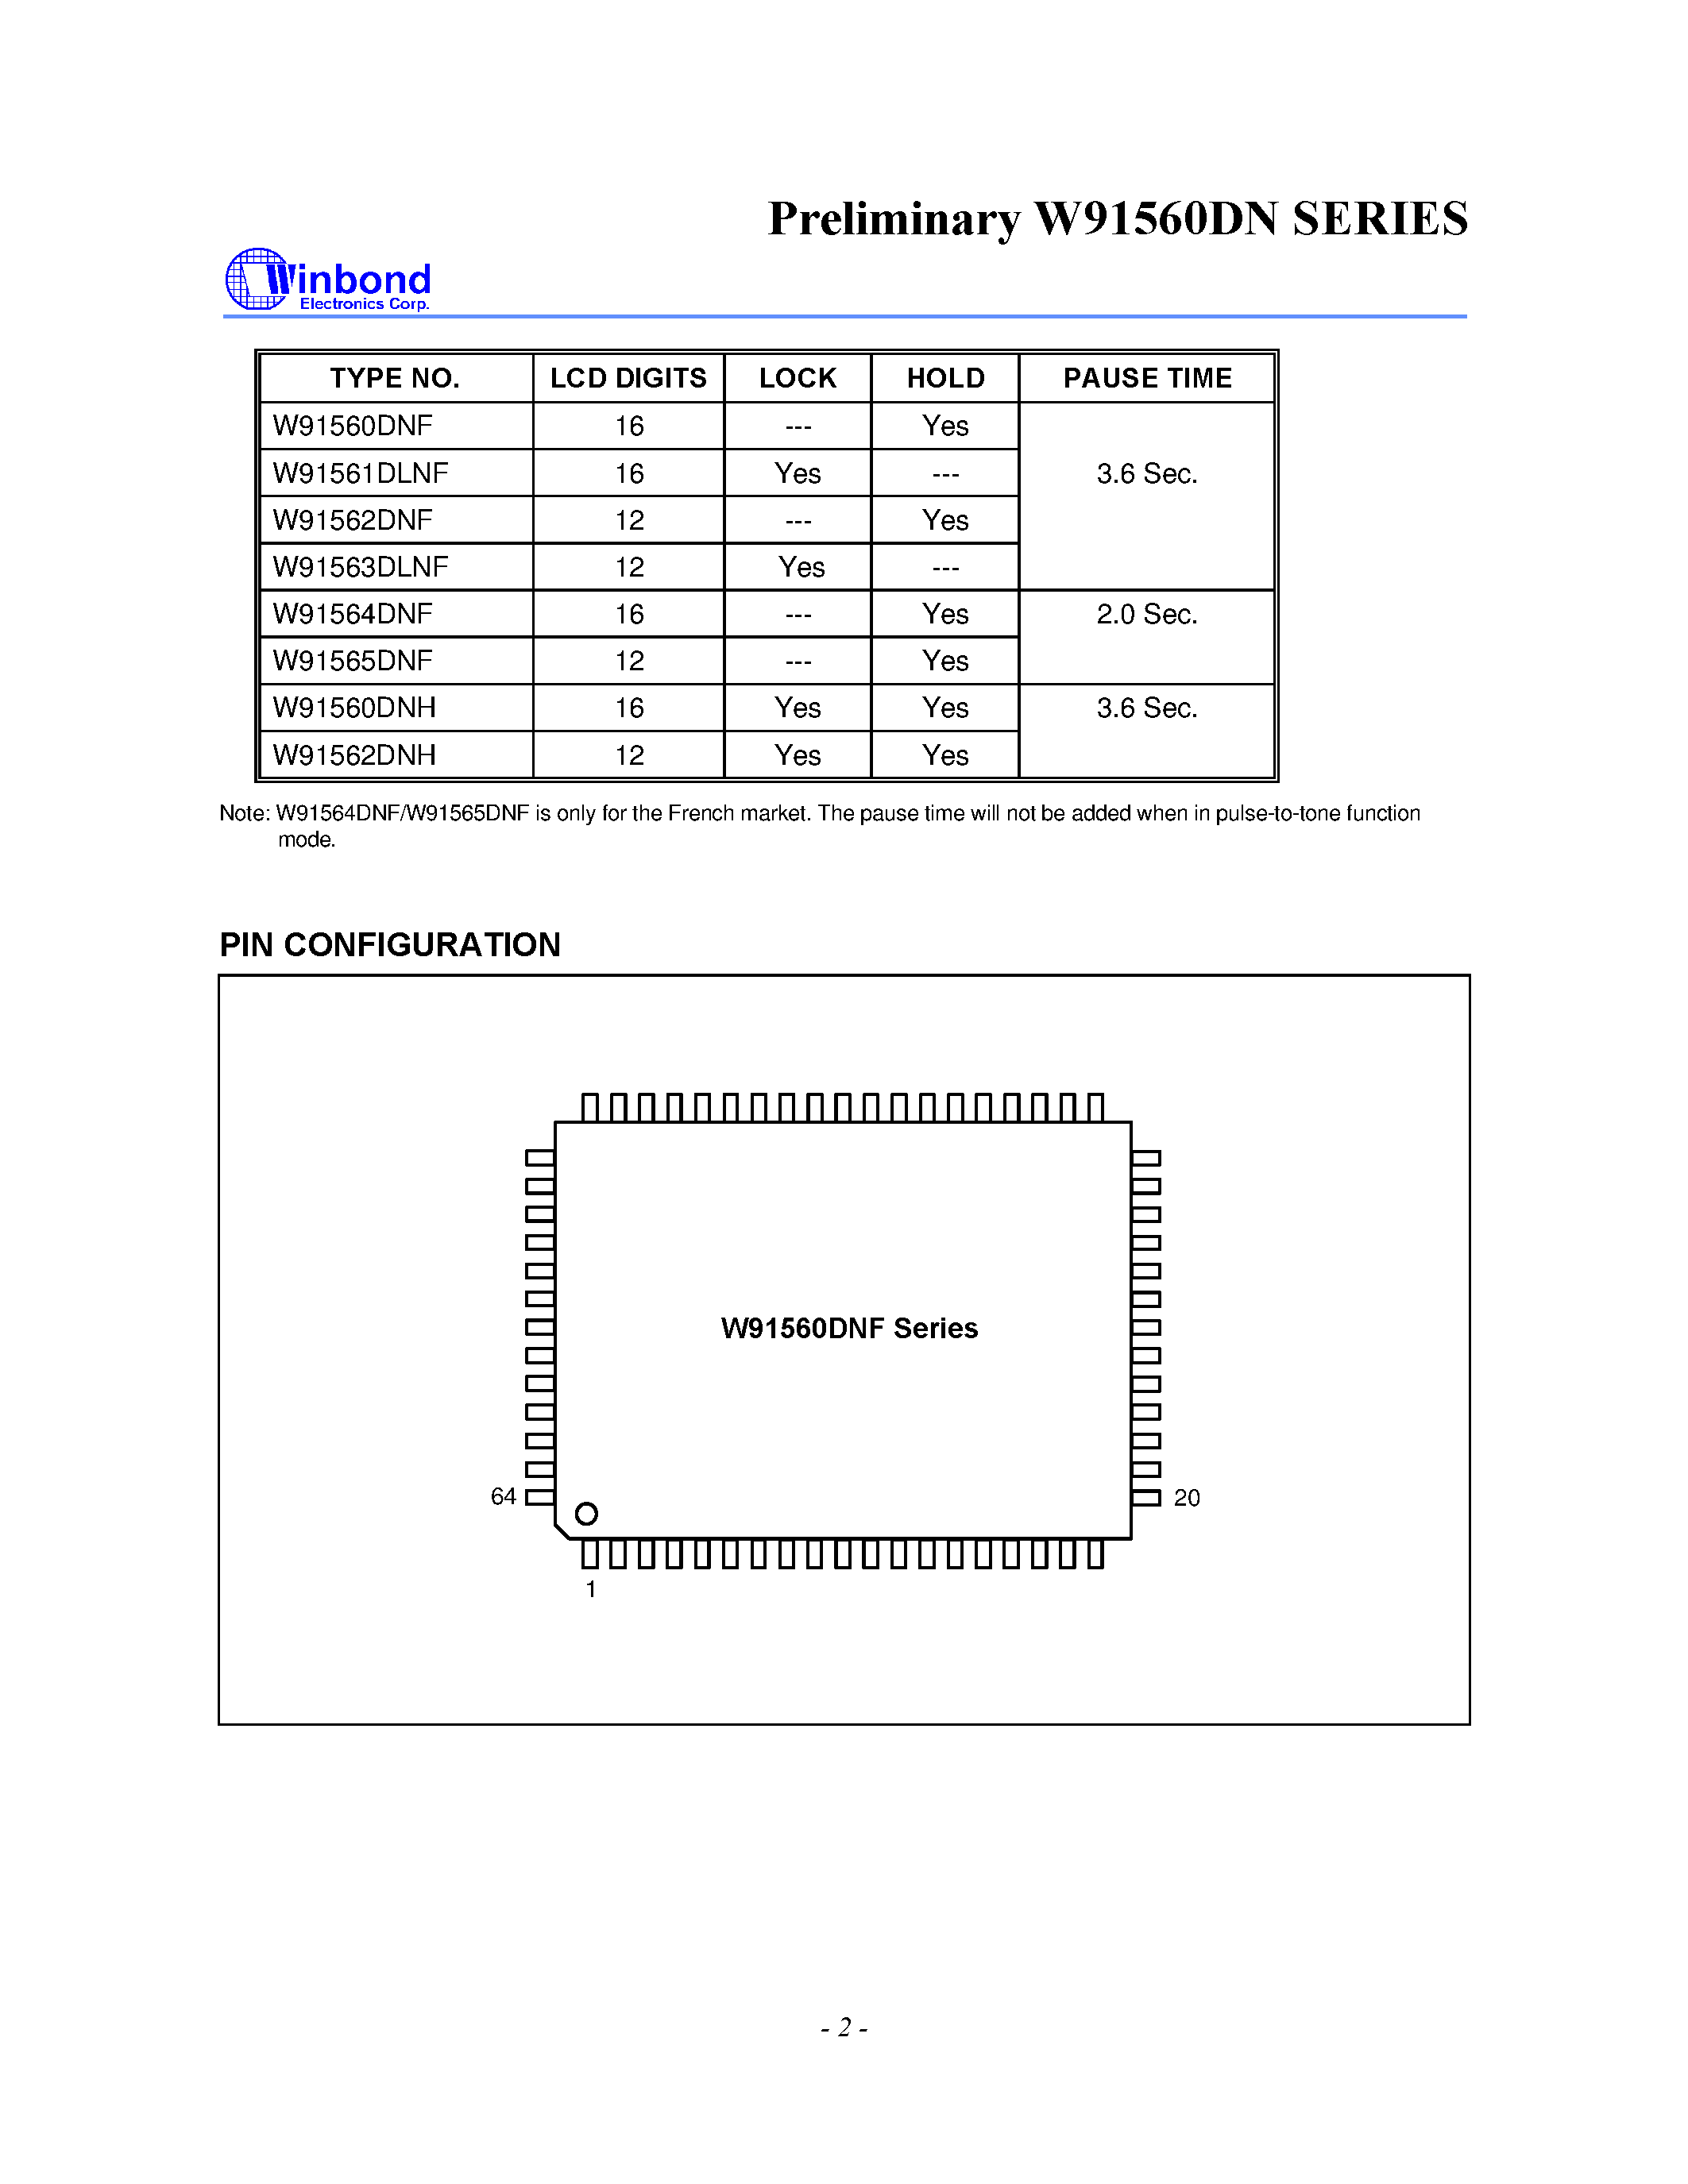 Datasheet W91560N - 3-MEMORY TONE/PULSE DIALER WITH SAVE/ KEYTONE/ LOCK AND HANDFREE FUNCTIONS page 2